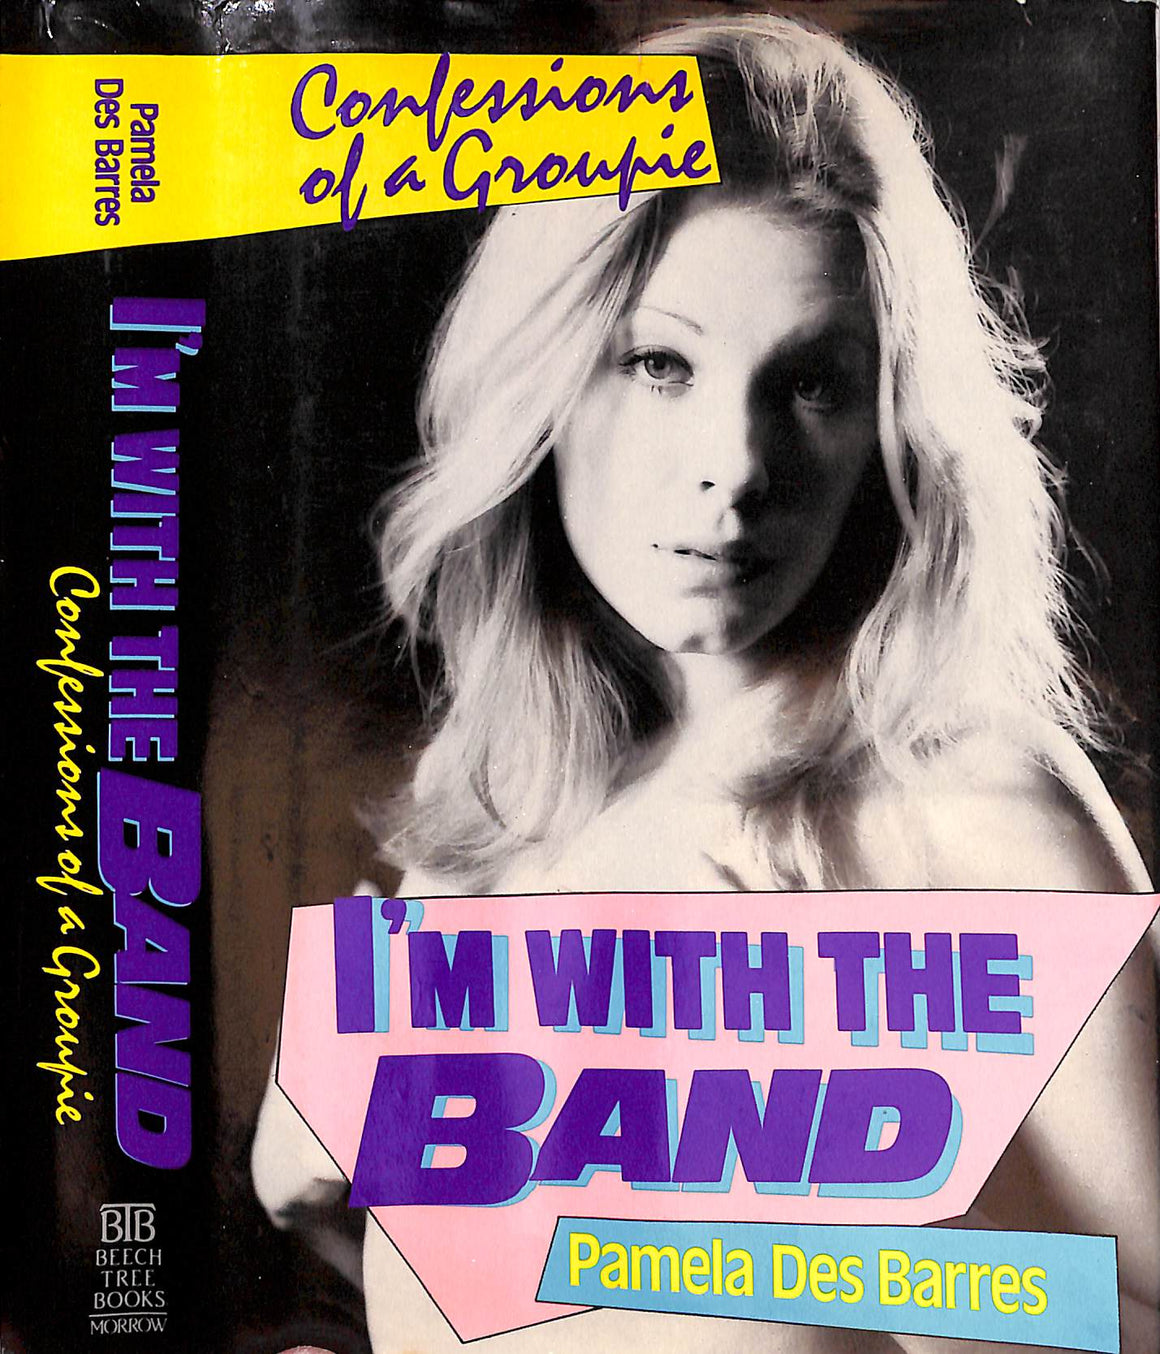 "I'm With The Band: Confessions Of A Groupie" 1987 DES BARRES, Pamela